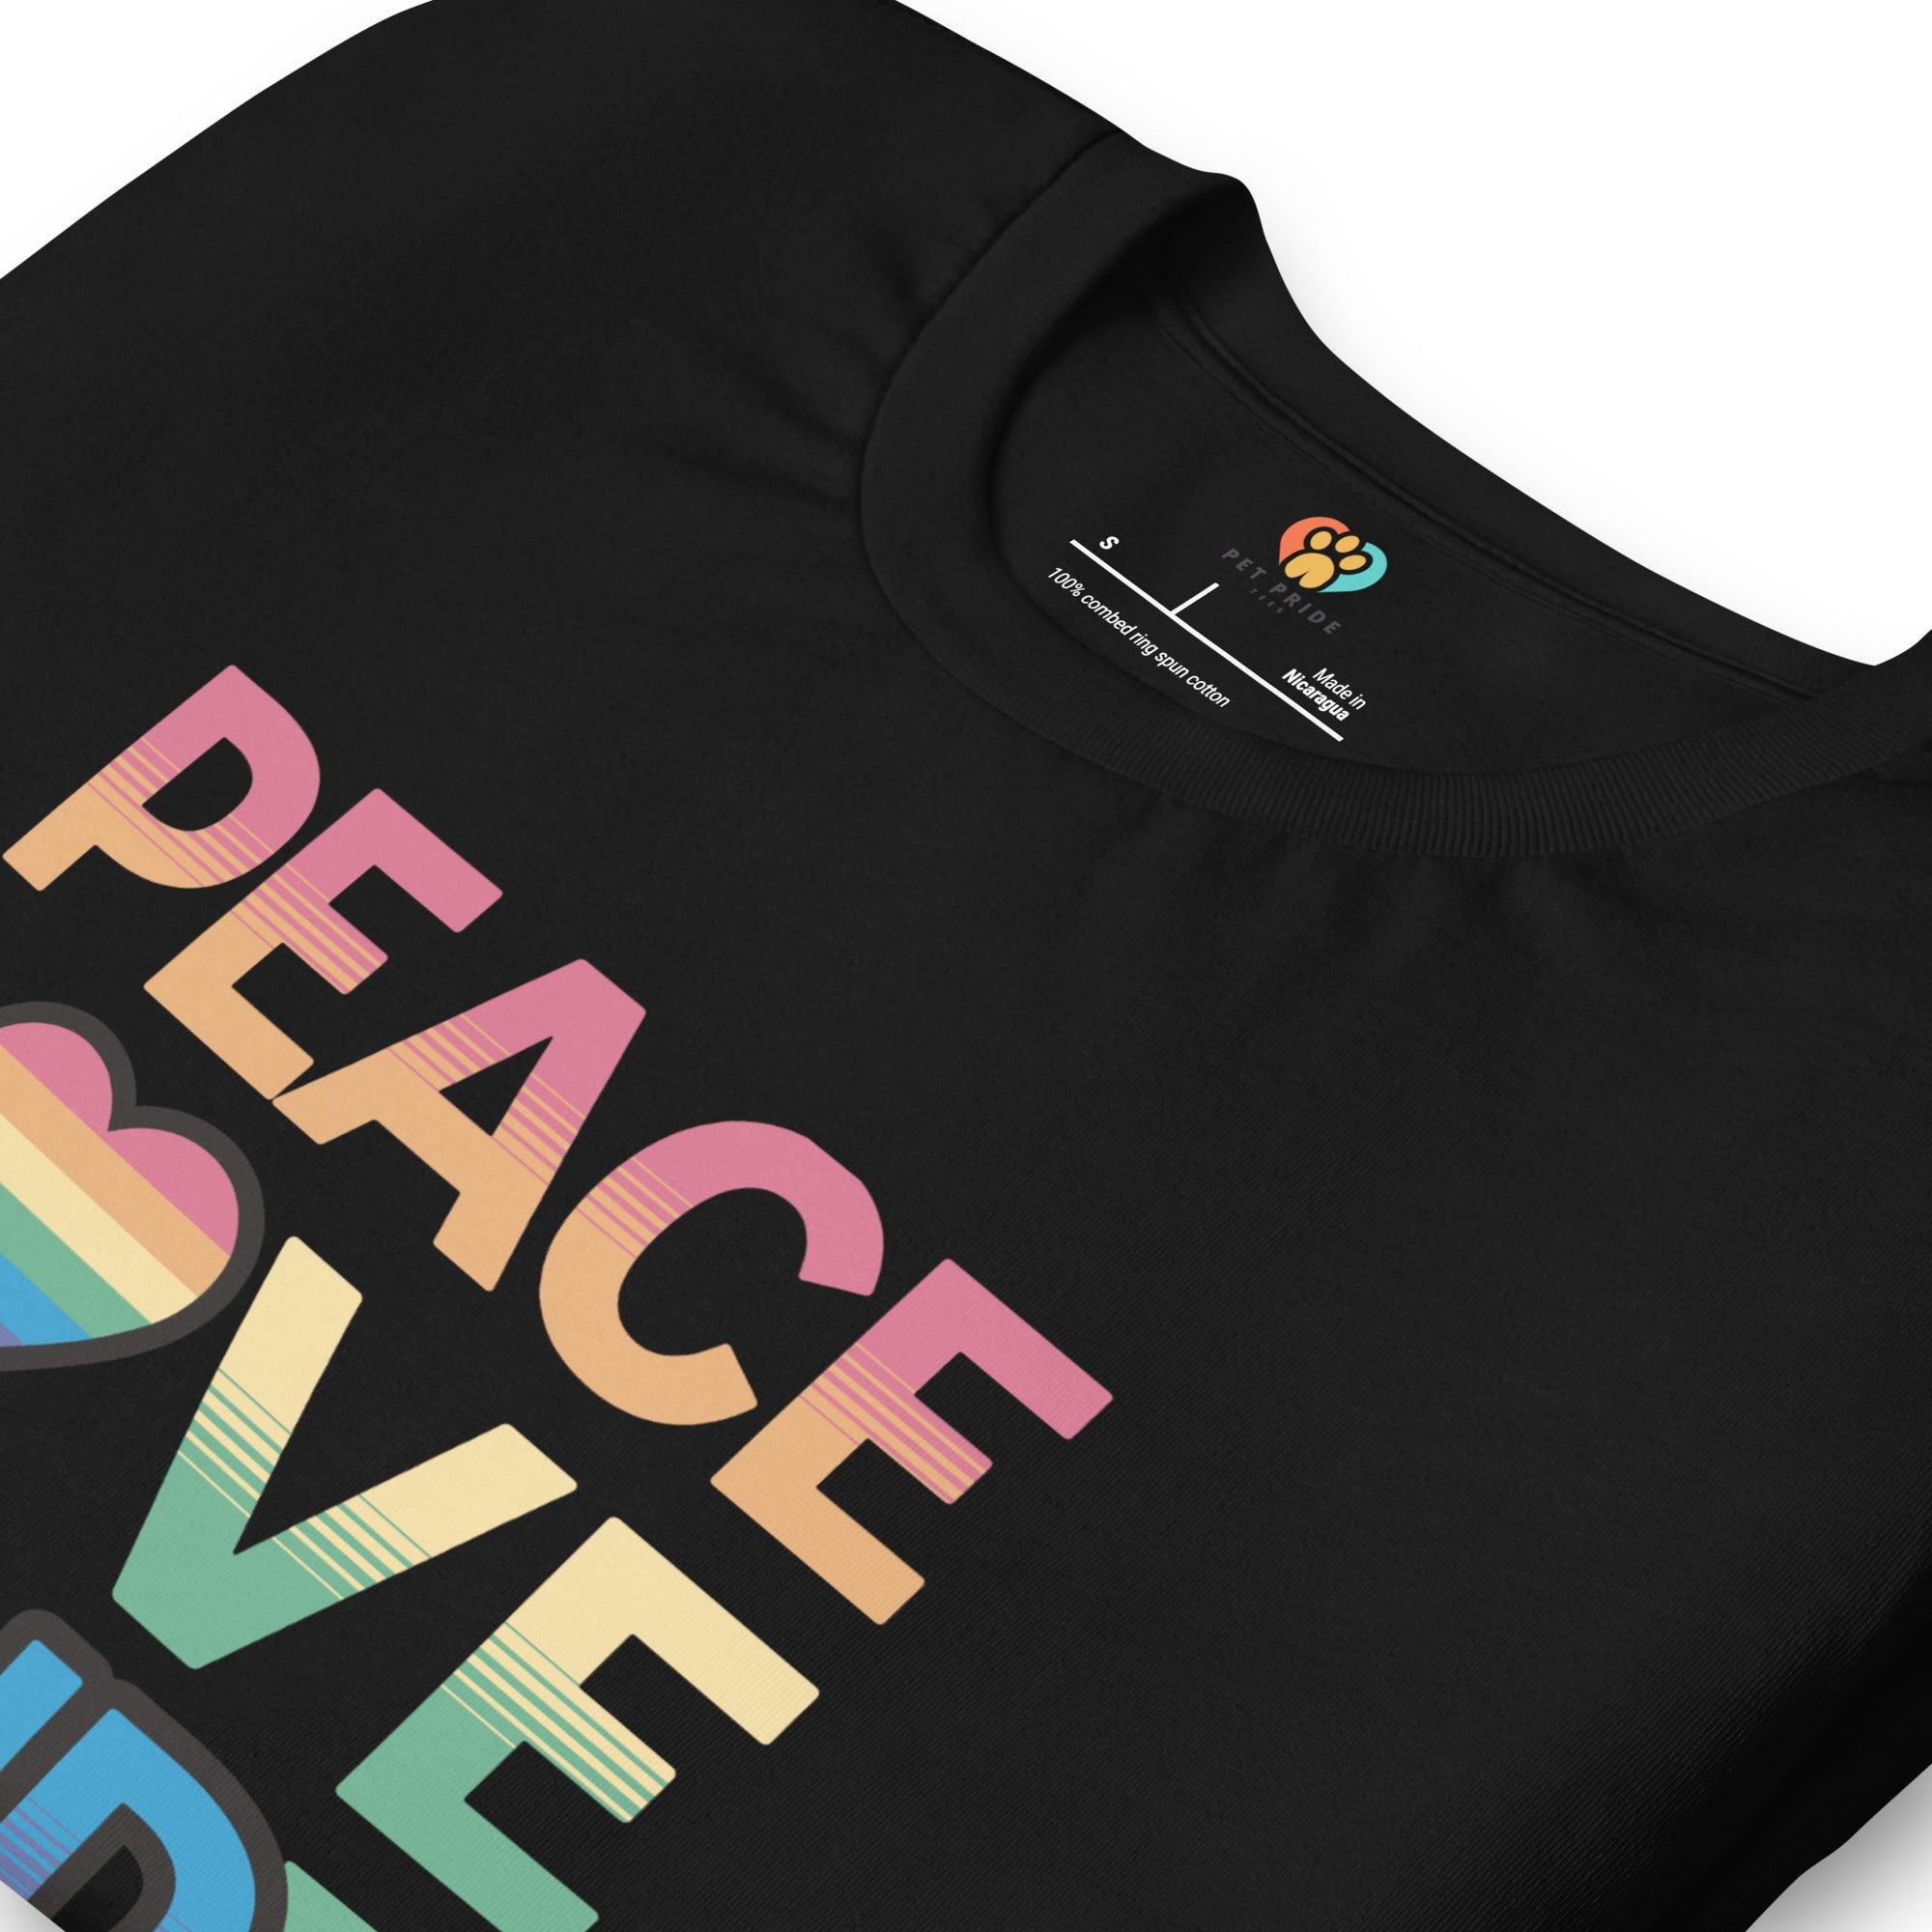 Peace, Love, and Paws Crew Neck Tee - Pet Pride Tees